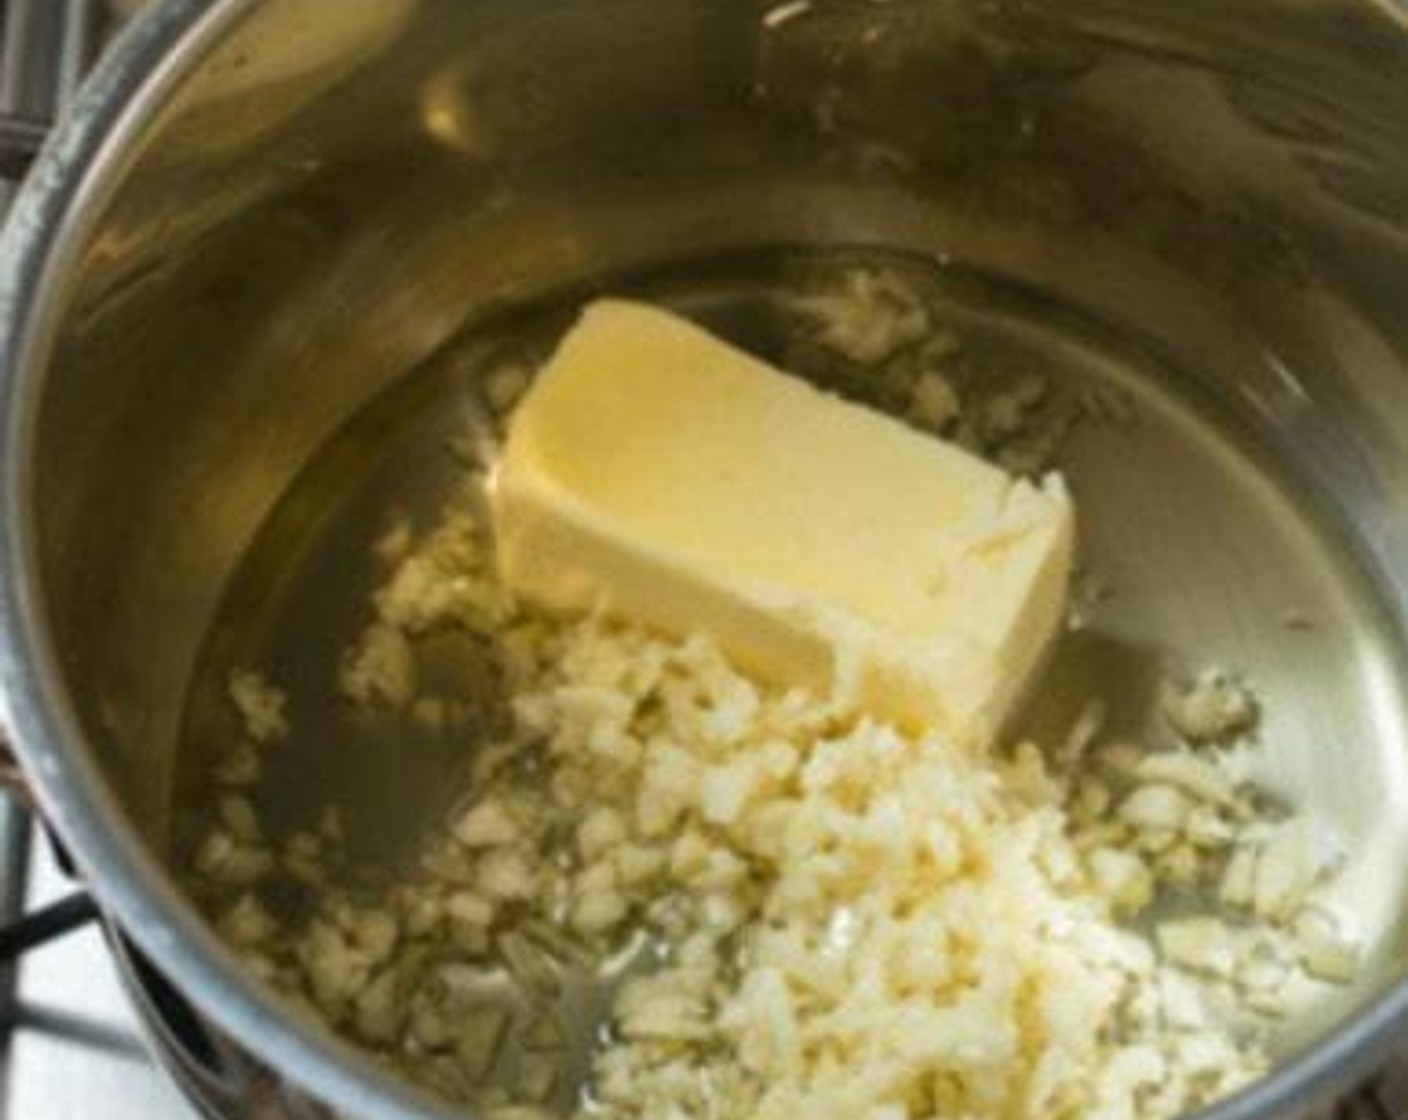 step 2 Put Salted Butter (1/3 cup), Garlic (10 cloves), Olive Oil (1/4 cup) in a small saucepan. Place the pan over low heat. Stir frequently, scraping the bottom of the pan as you stir. Continue cooking the garlic over very low heat.